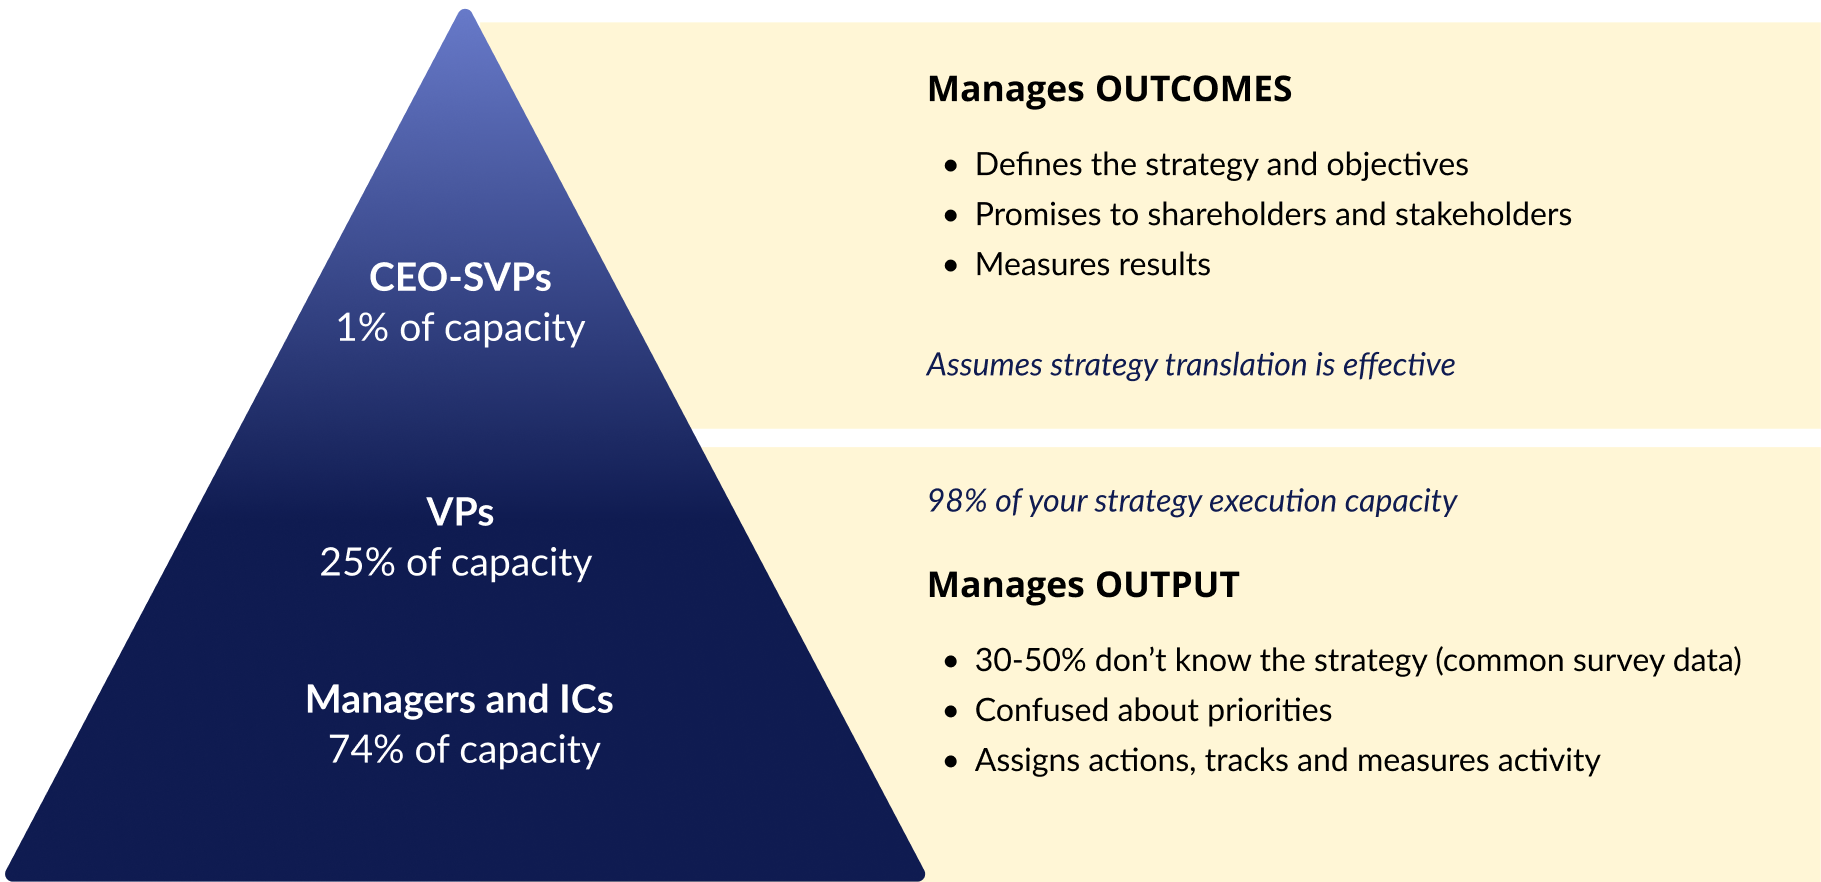 The org structure and who manages outcomes vs outputs